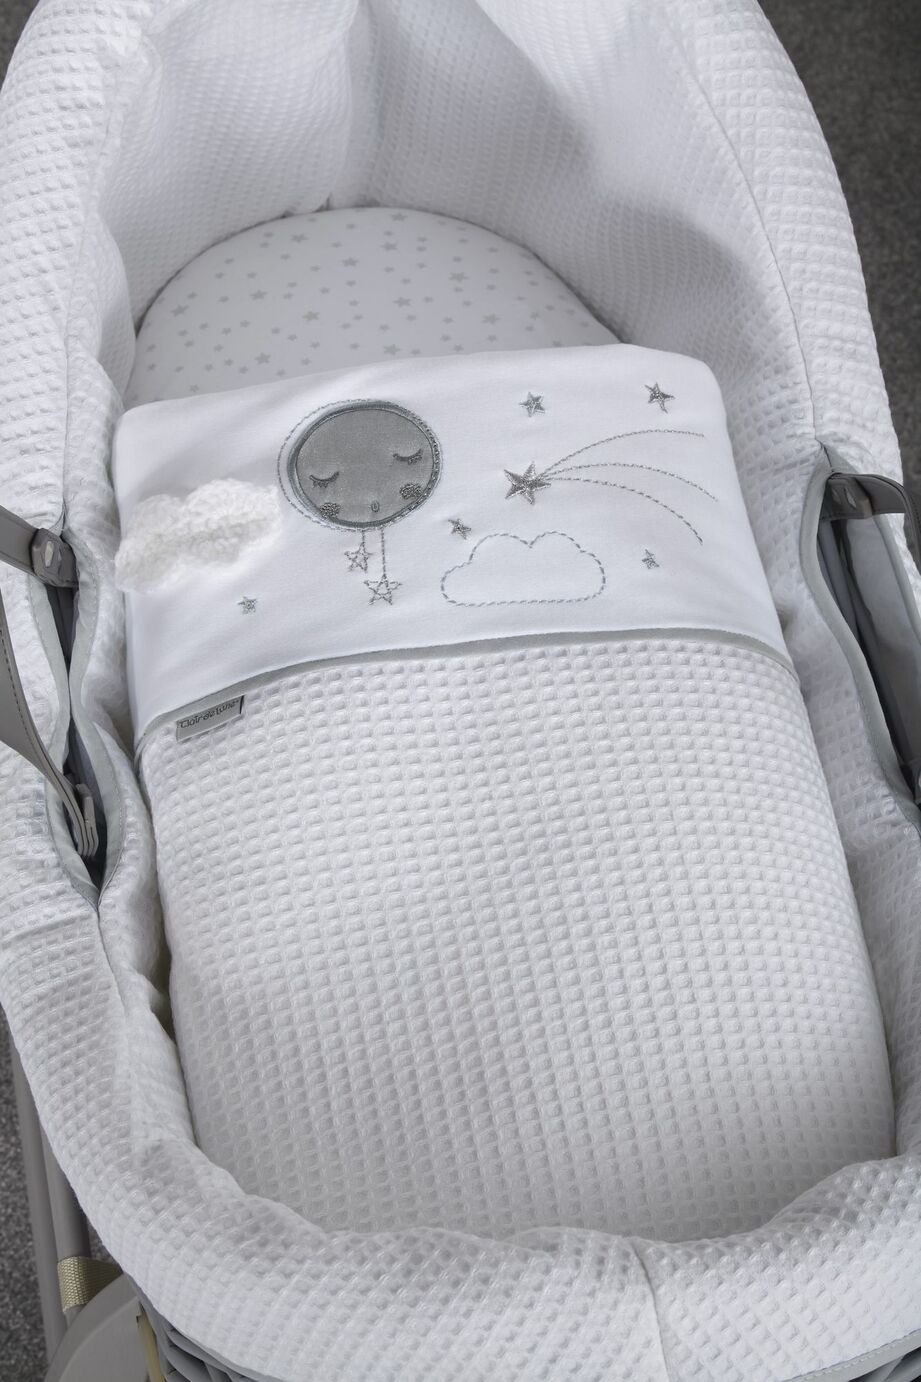 Clair de Lune Over the Moon Willow Bassinet Review